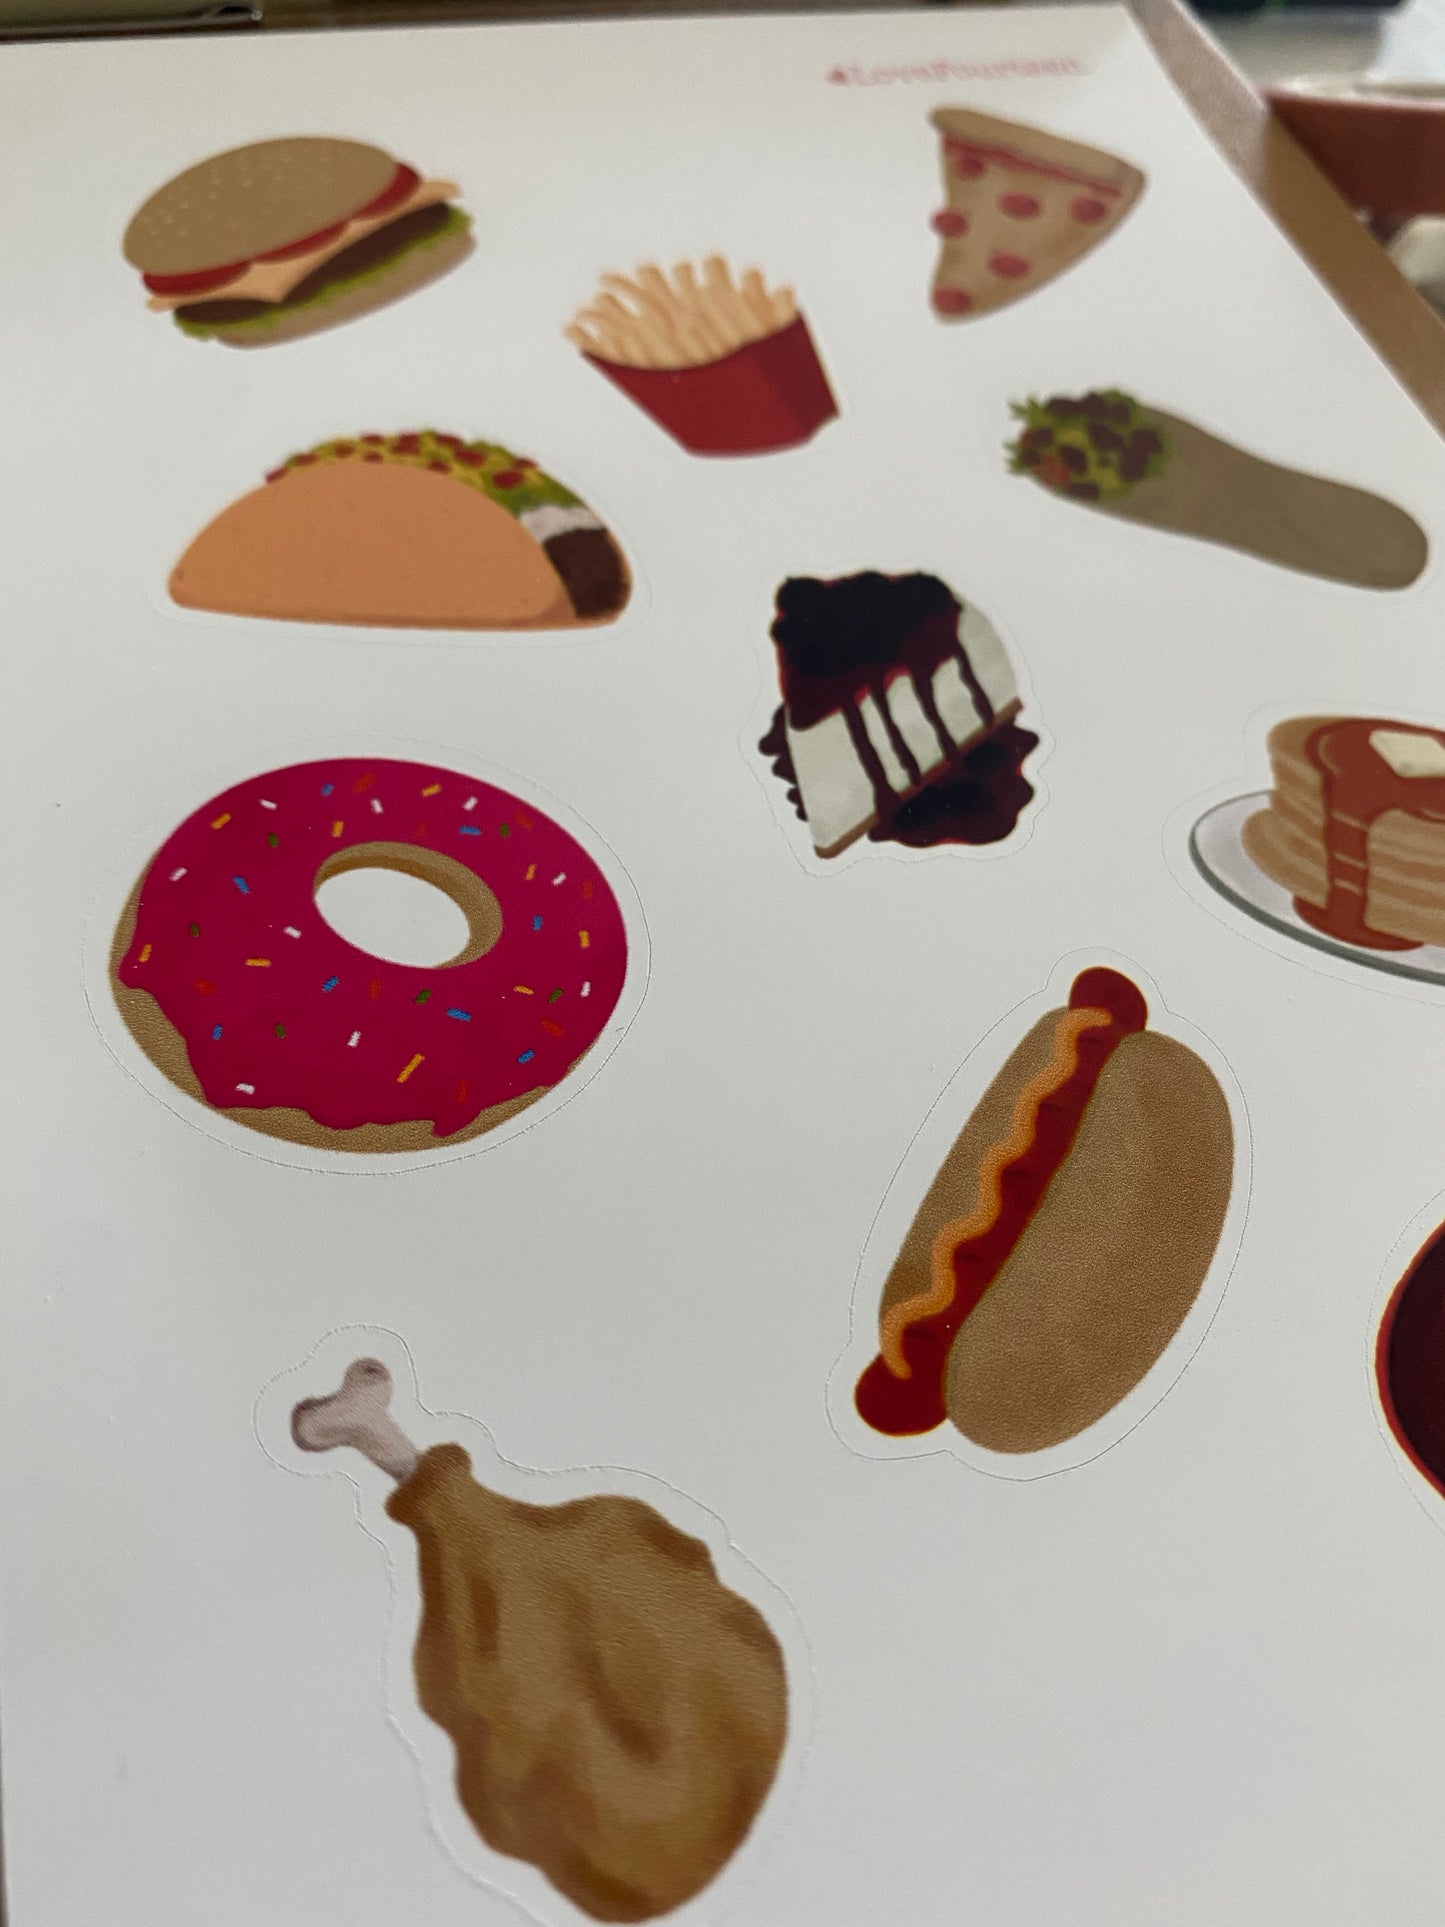 A closer look of journal sticker of comfort food like burger, fries, pizza, tacos, cheesecake, burrito, donut, pancakes, hotdog, chicken, and ramen